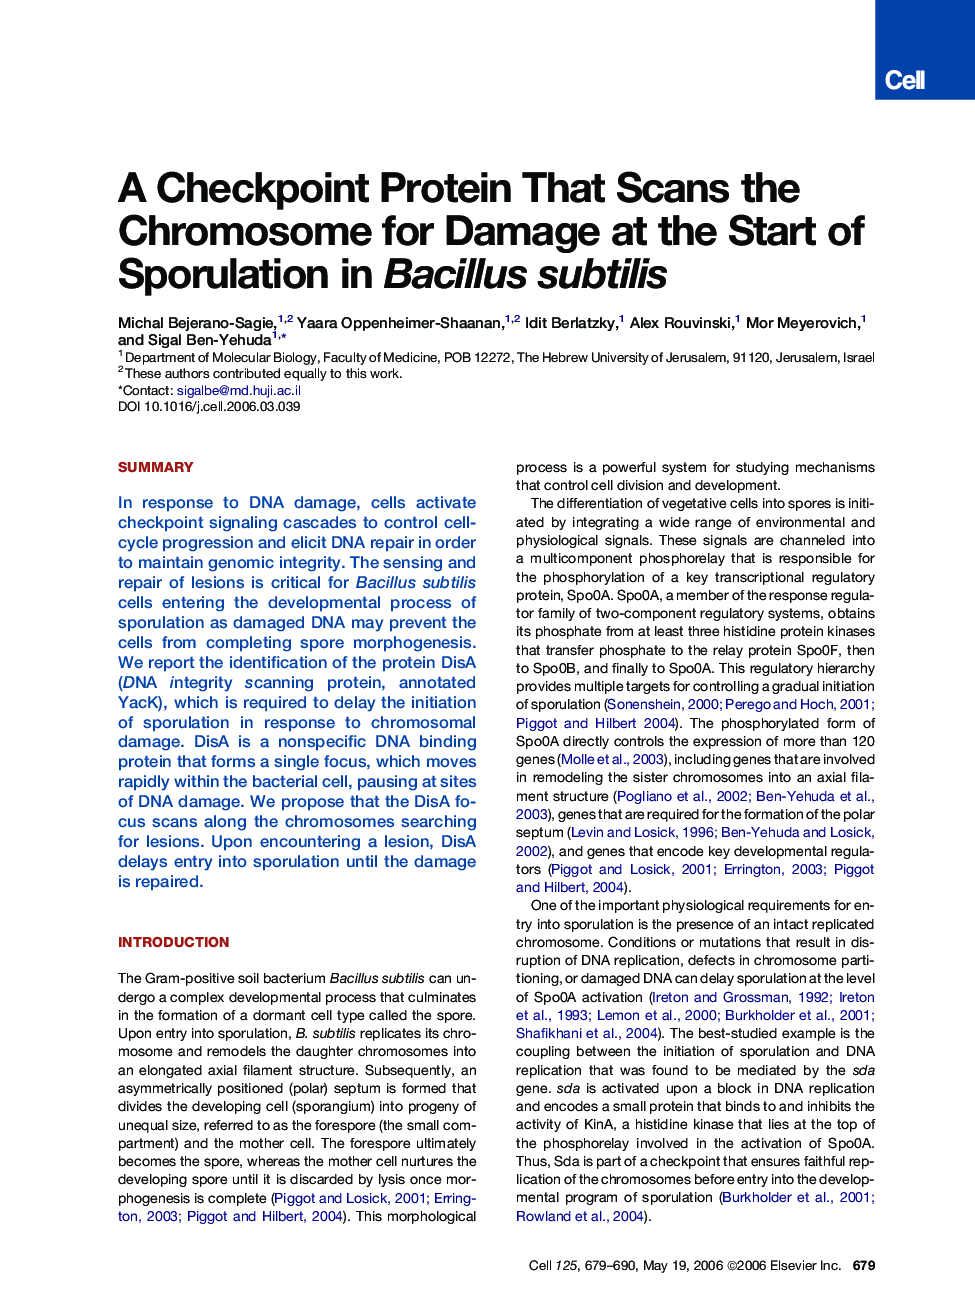 A Checkpoint Protein That Scans the Chromosome for Damage at the Start of Sporulation in Bacillus subtilis